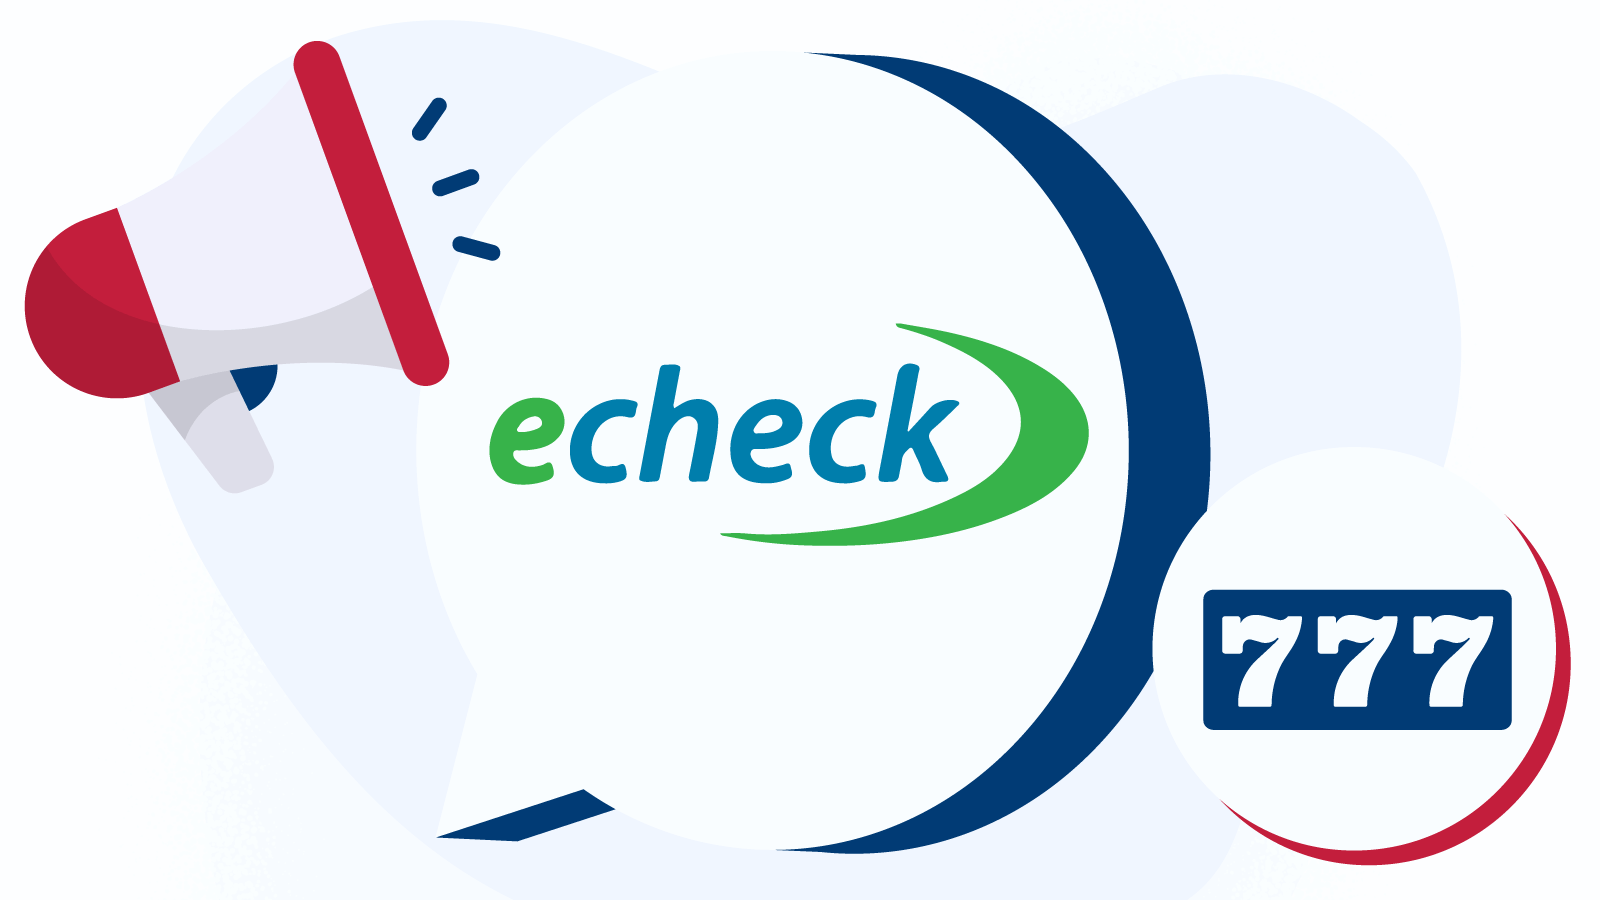 Our eCheck casino Canada promotions – how and why did we pick them